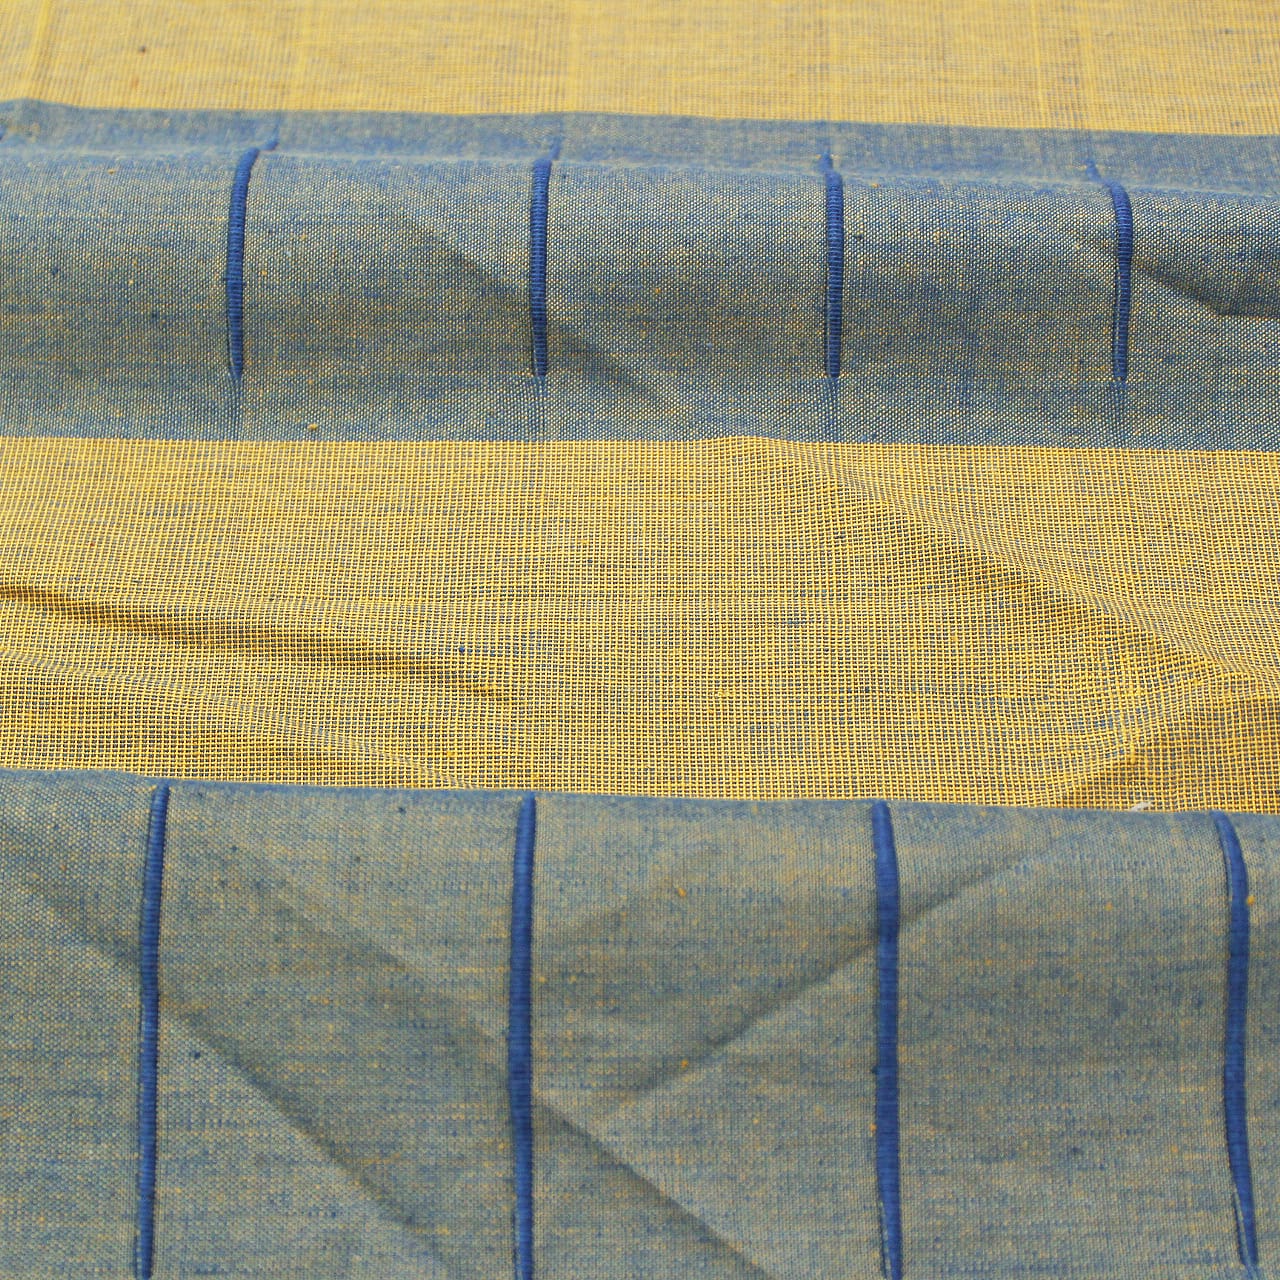 Alpha Blue Woven Cotton Stripes Table Cover(1 Pc) online in India